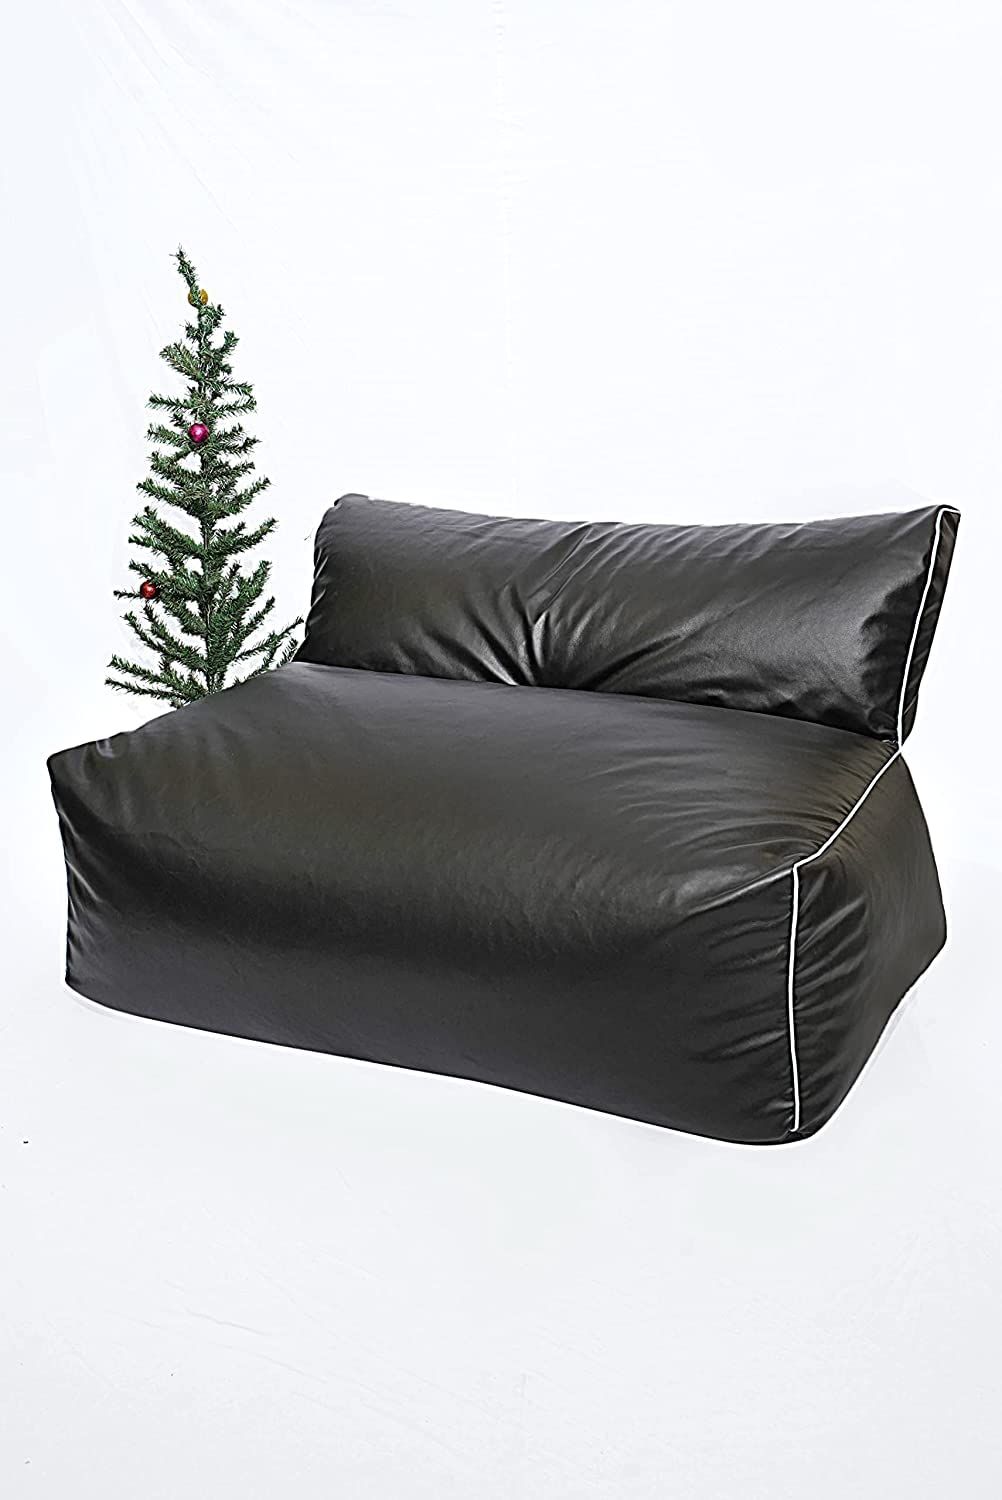 ink craft 2-Seater Black Bean Bag Cover Without Beans, Perfect for Home, Bedroom, Office, and Lounge – Stylish Comfort in a Contemporary Design